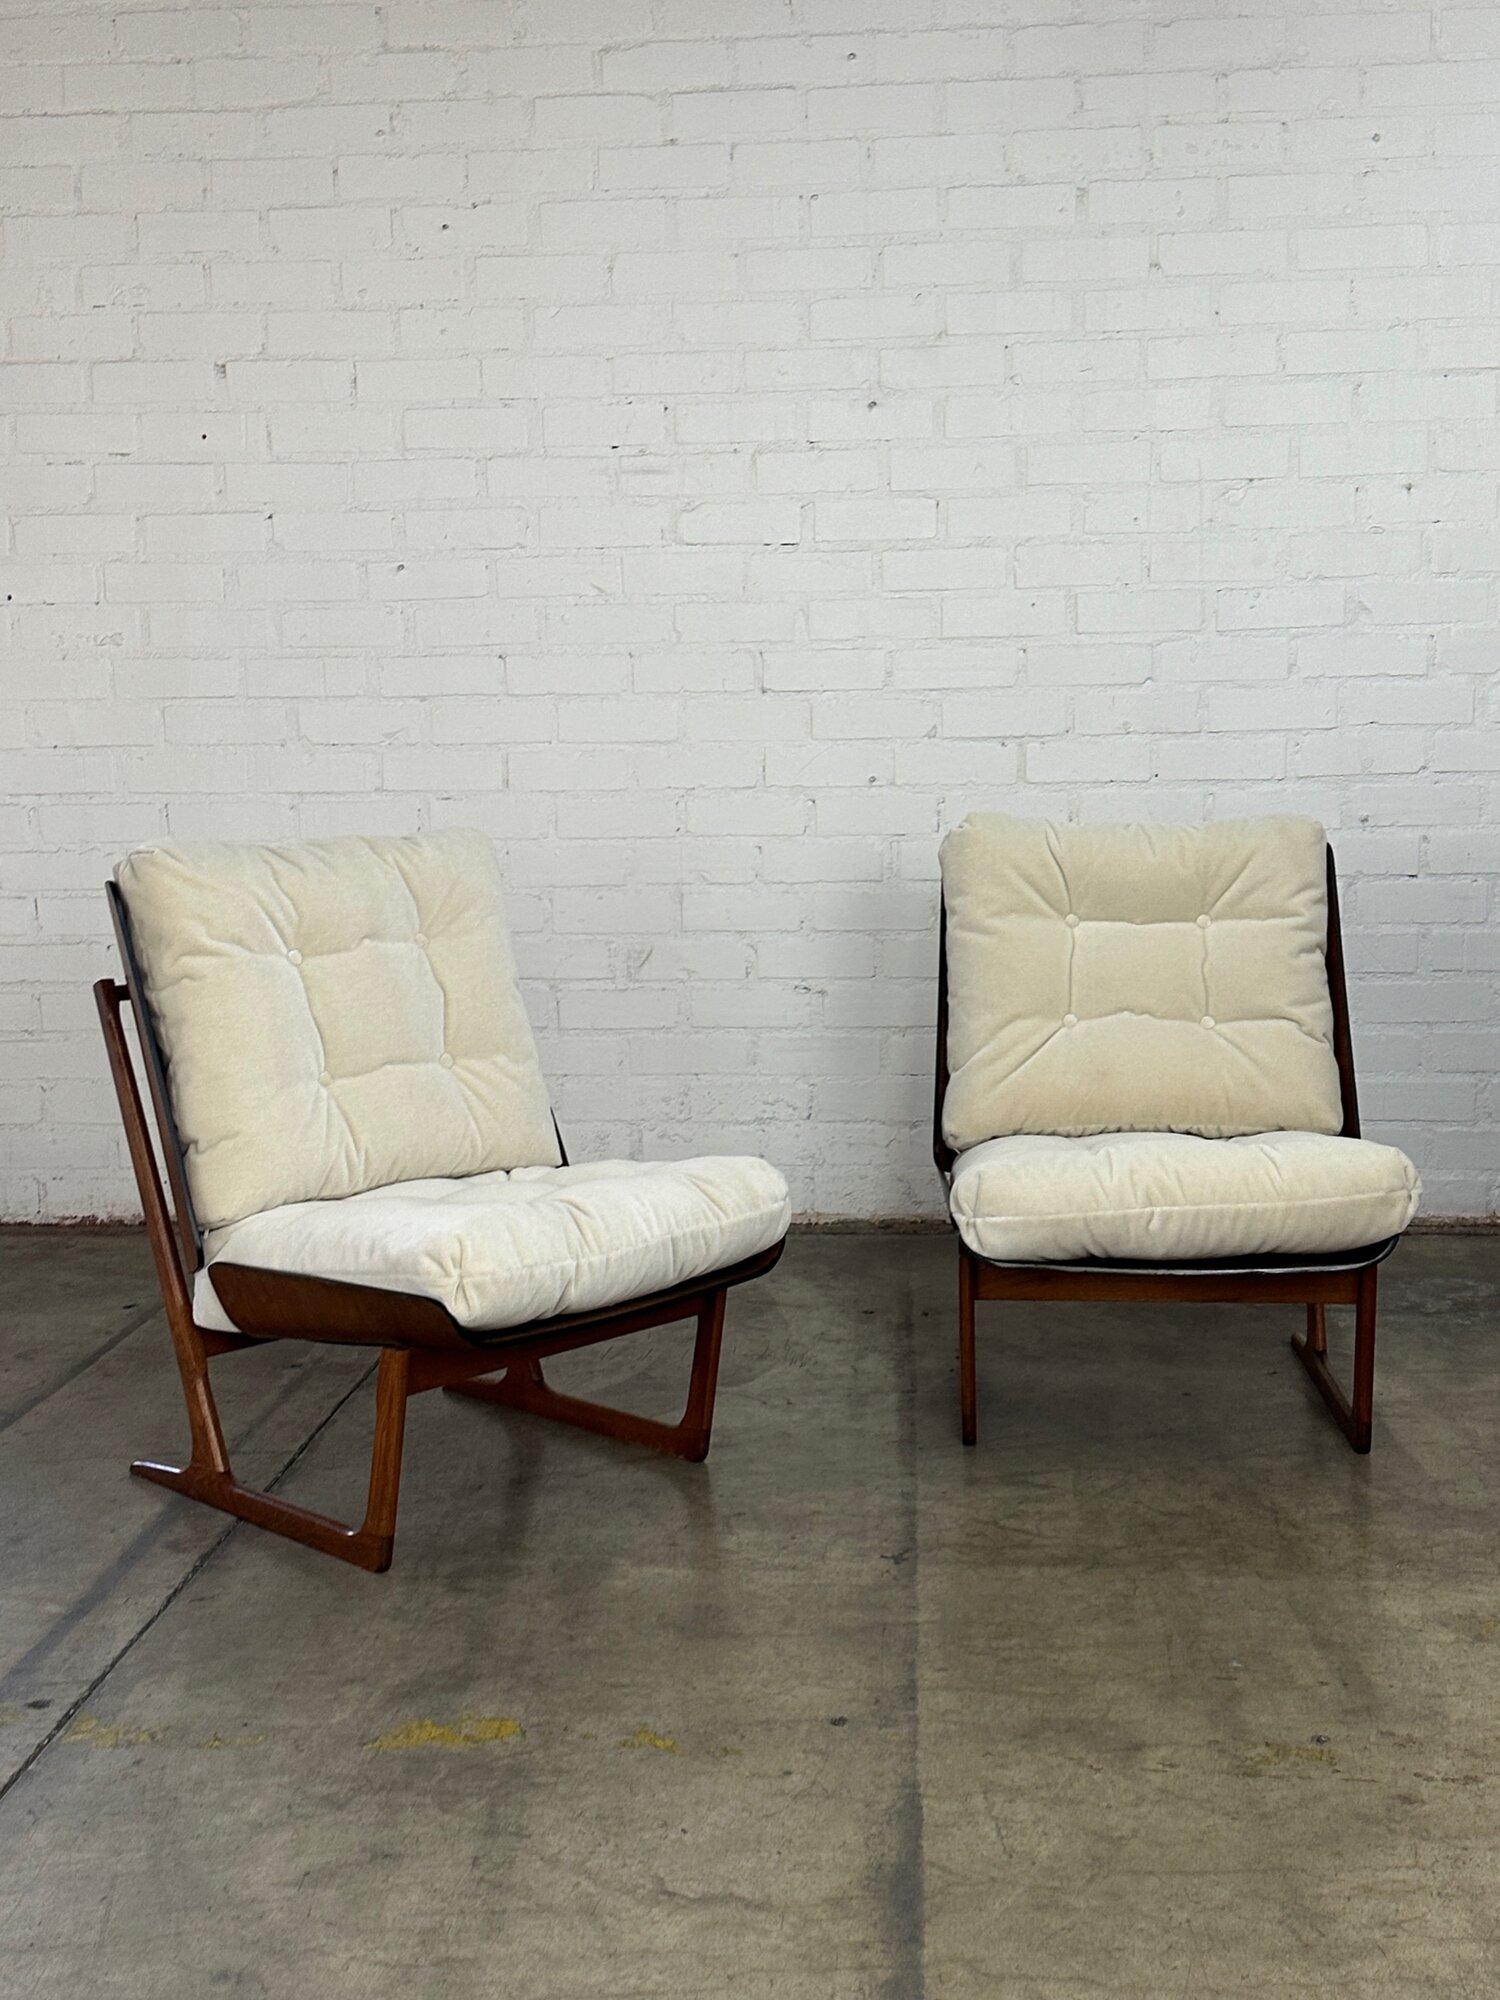 Mid-Century Modern Sled Chair by Hans Juergens for Deco House- pair For Sale